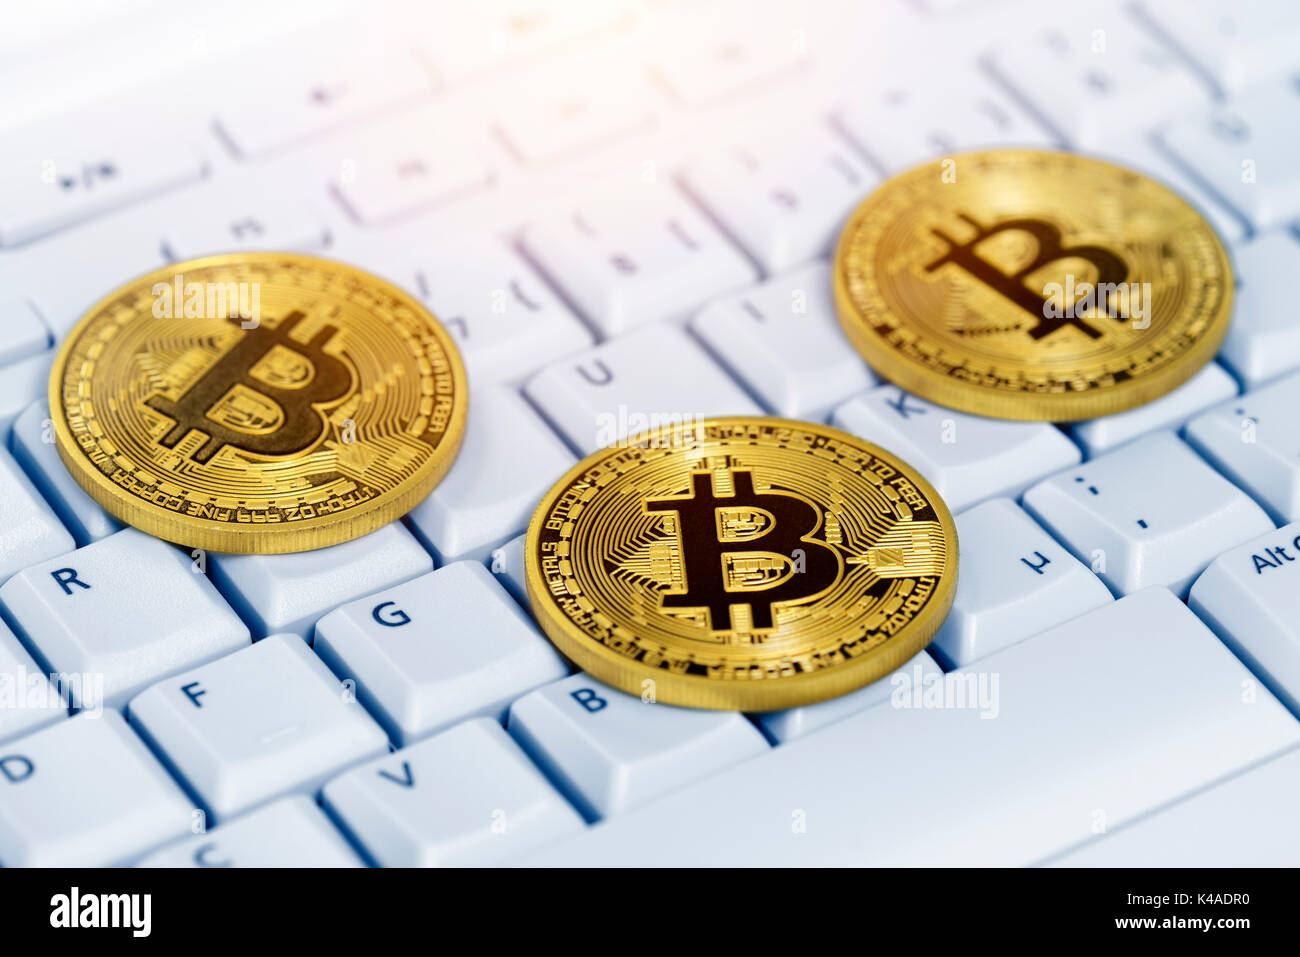 Bitcoins On Computer Keyboard, Virtual Currency Stock Photo